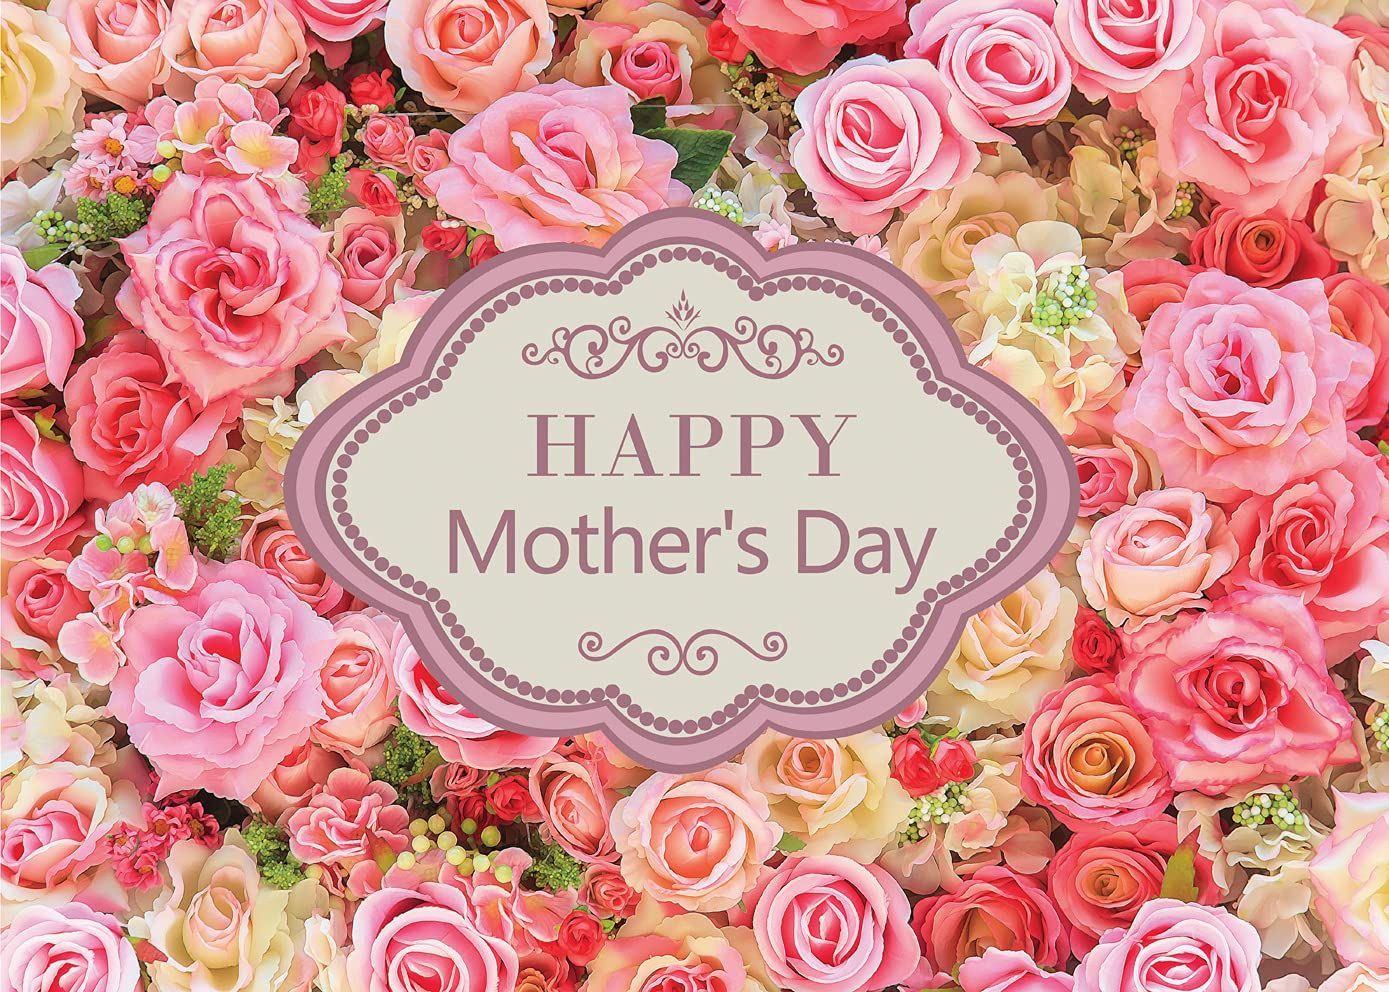 Mothers Day Flowers, Florist | Rockford, IL | Stems Floral Design